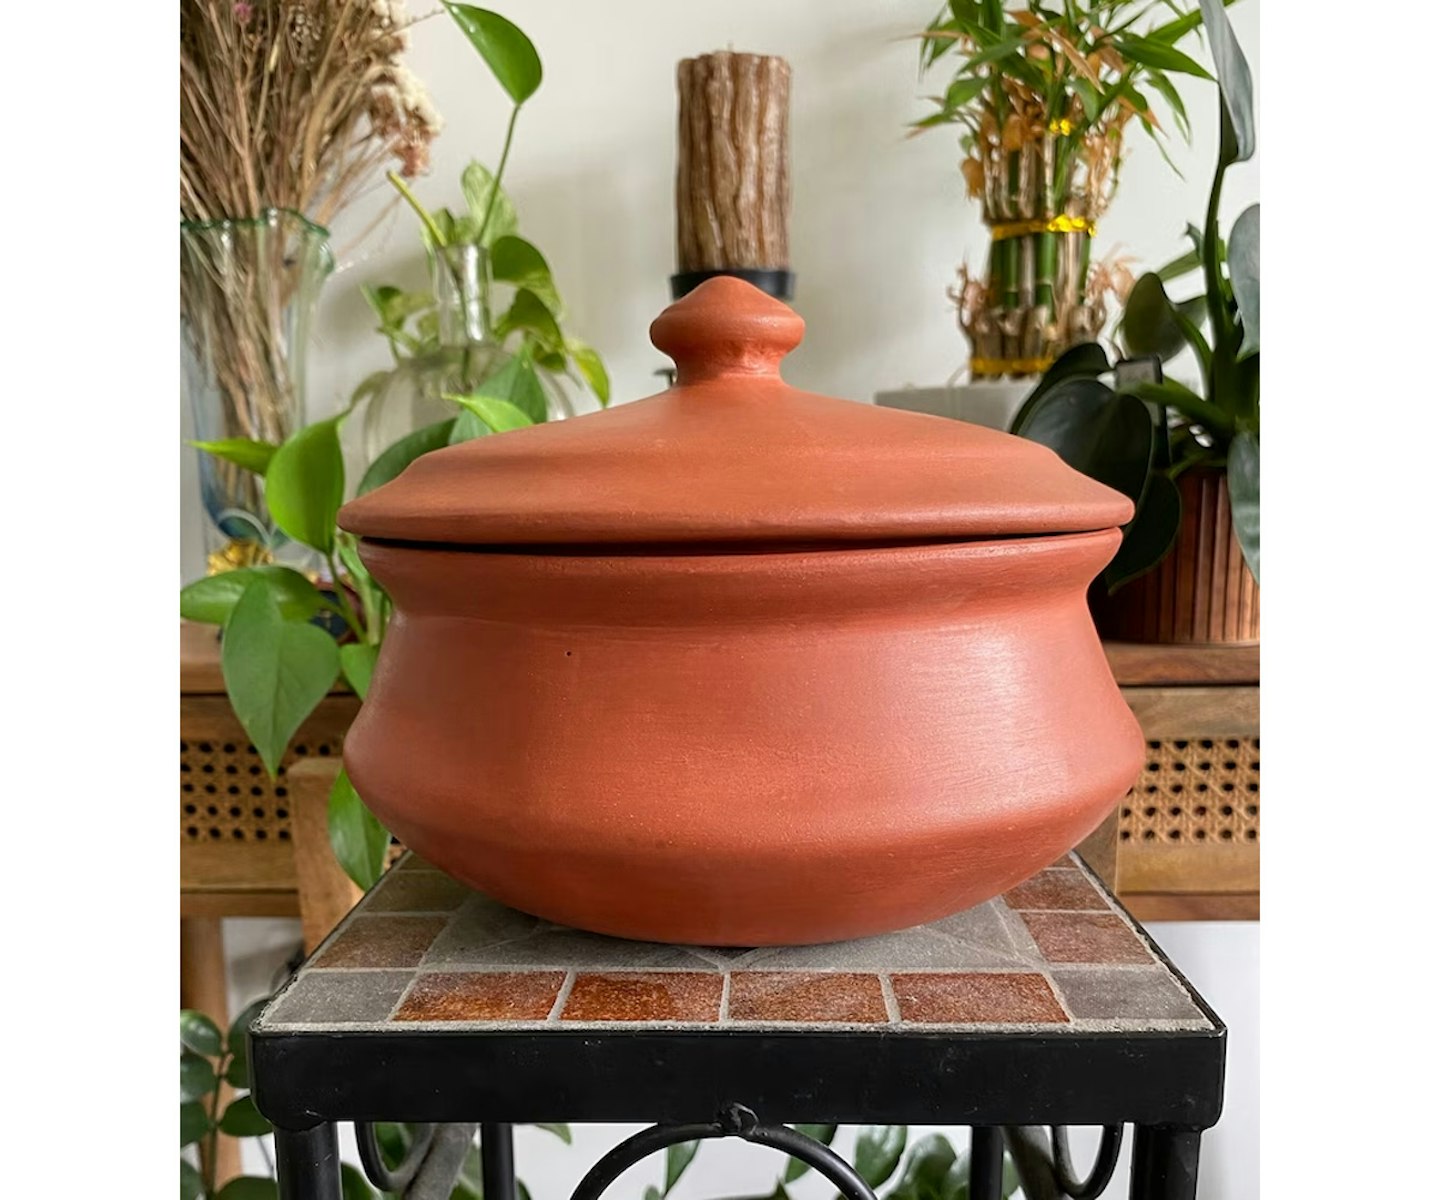 Clay Pot Cooking: How-to Cook In Pure Clay Pots?